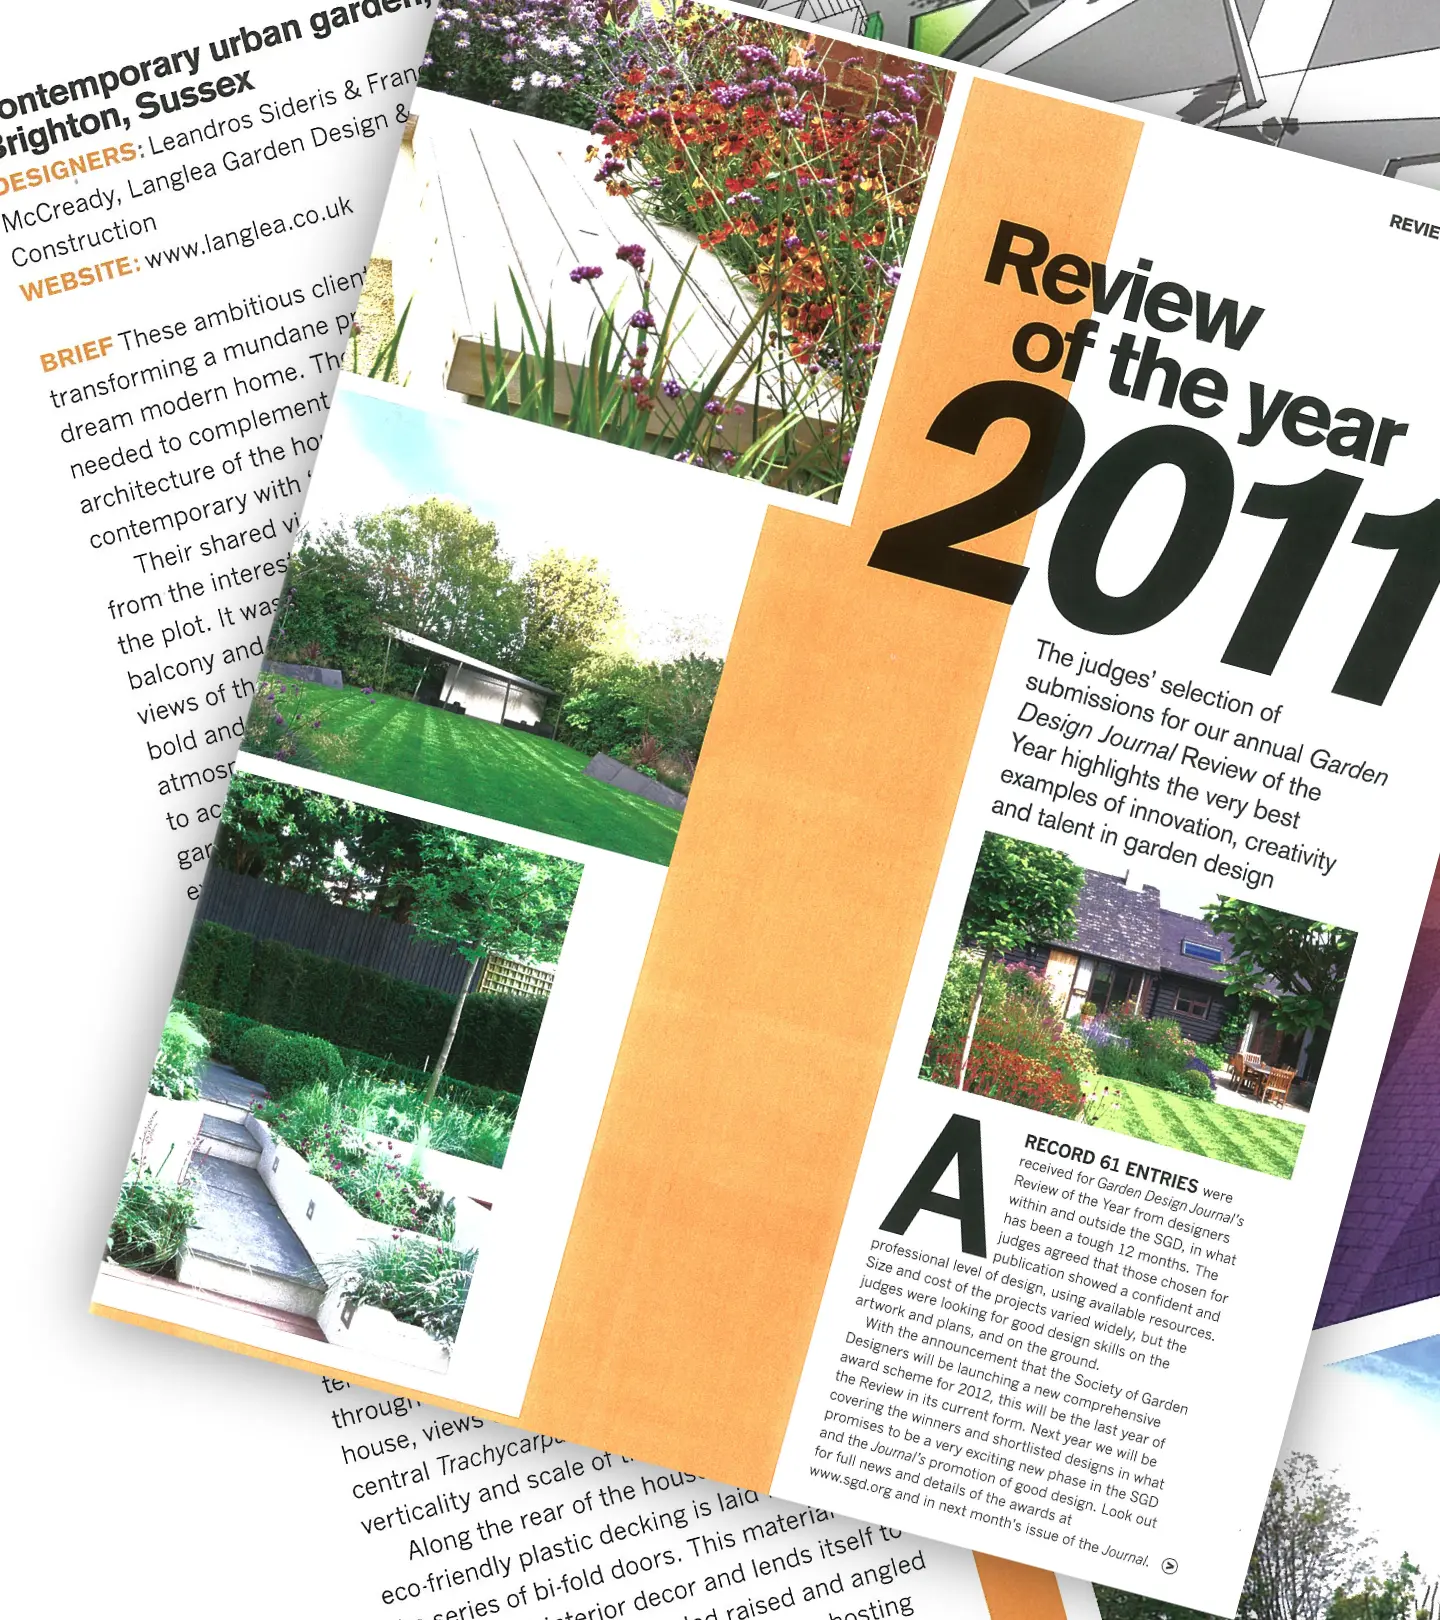 National Garden Design Journal 'Review of the Year 2011'